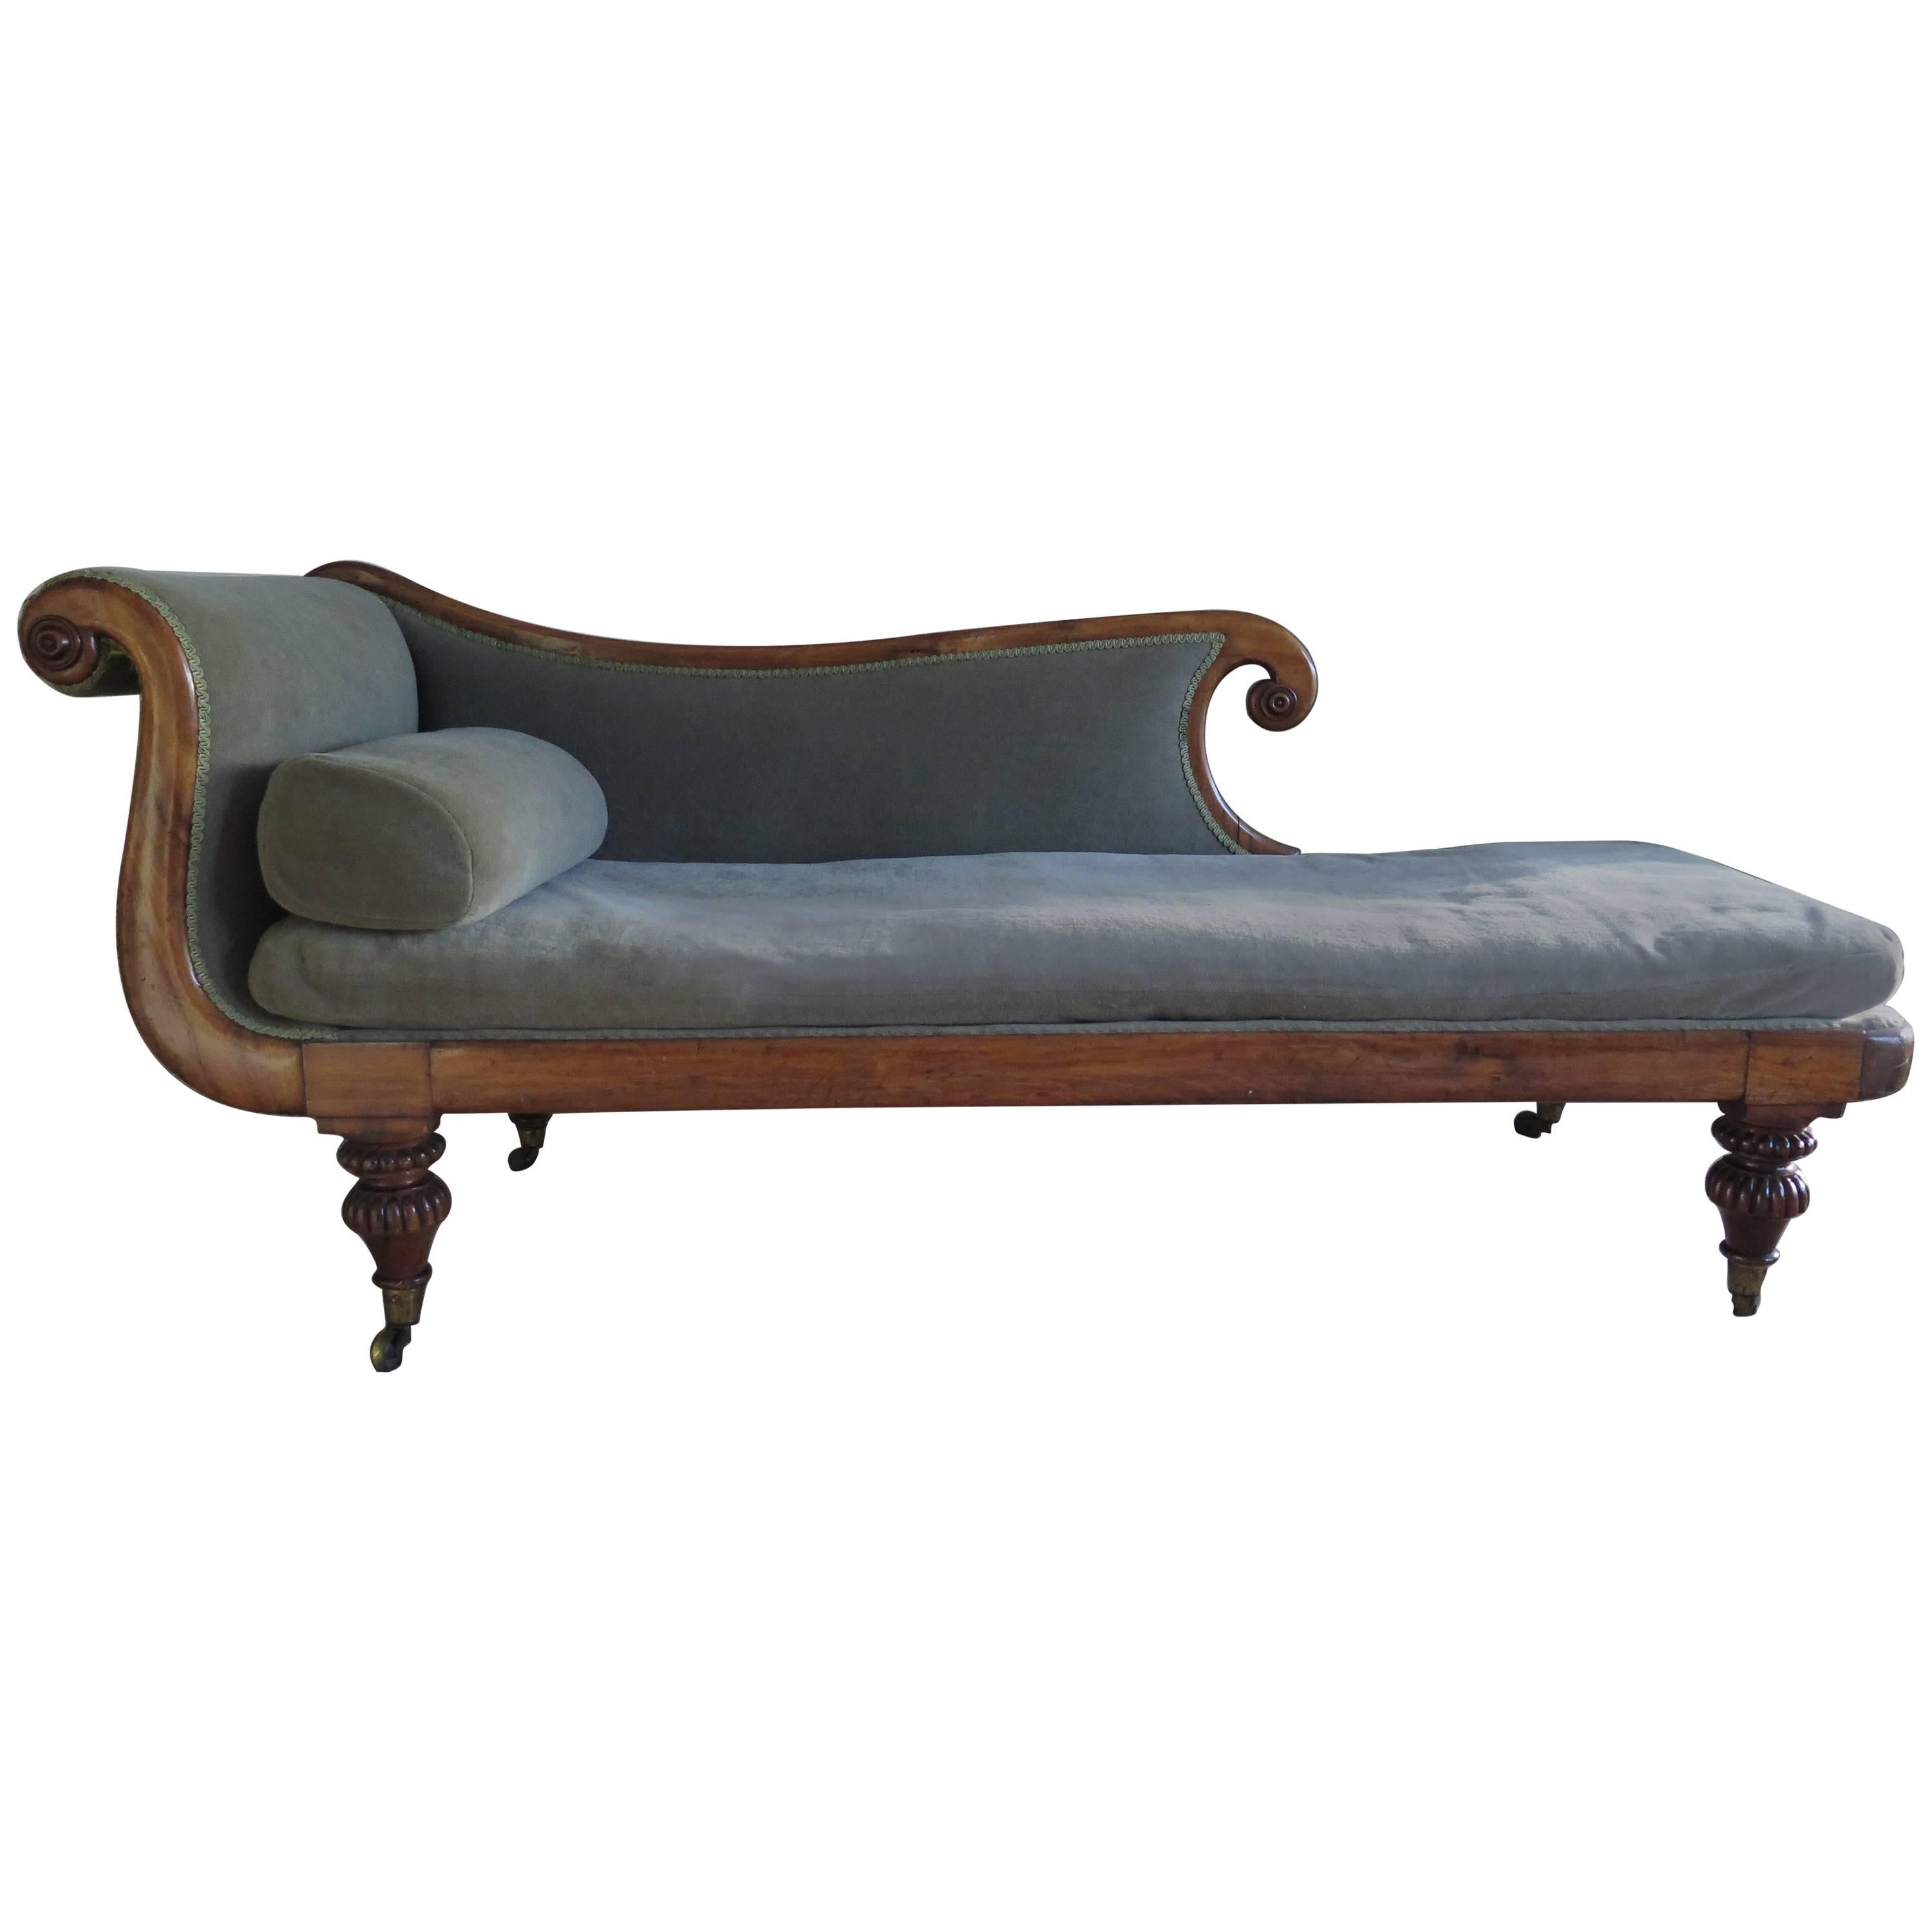 Regency Period Chaise Longue or Daybed, Mahogany, William IVth, circa 1830